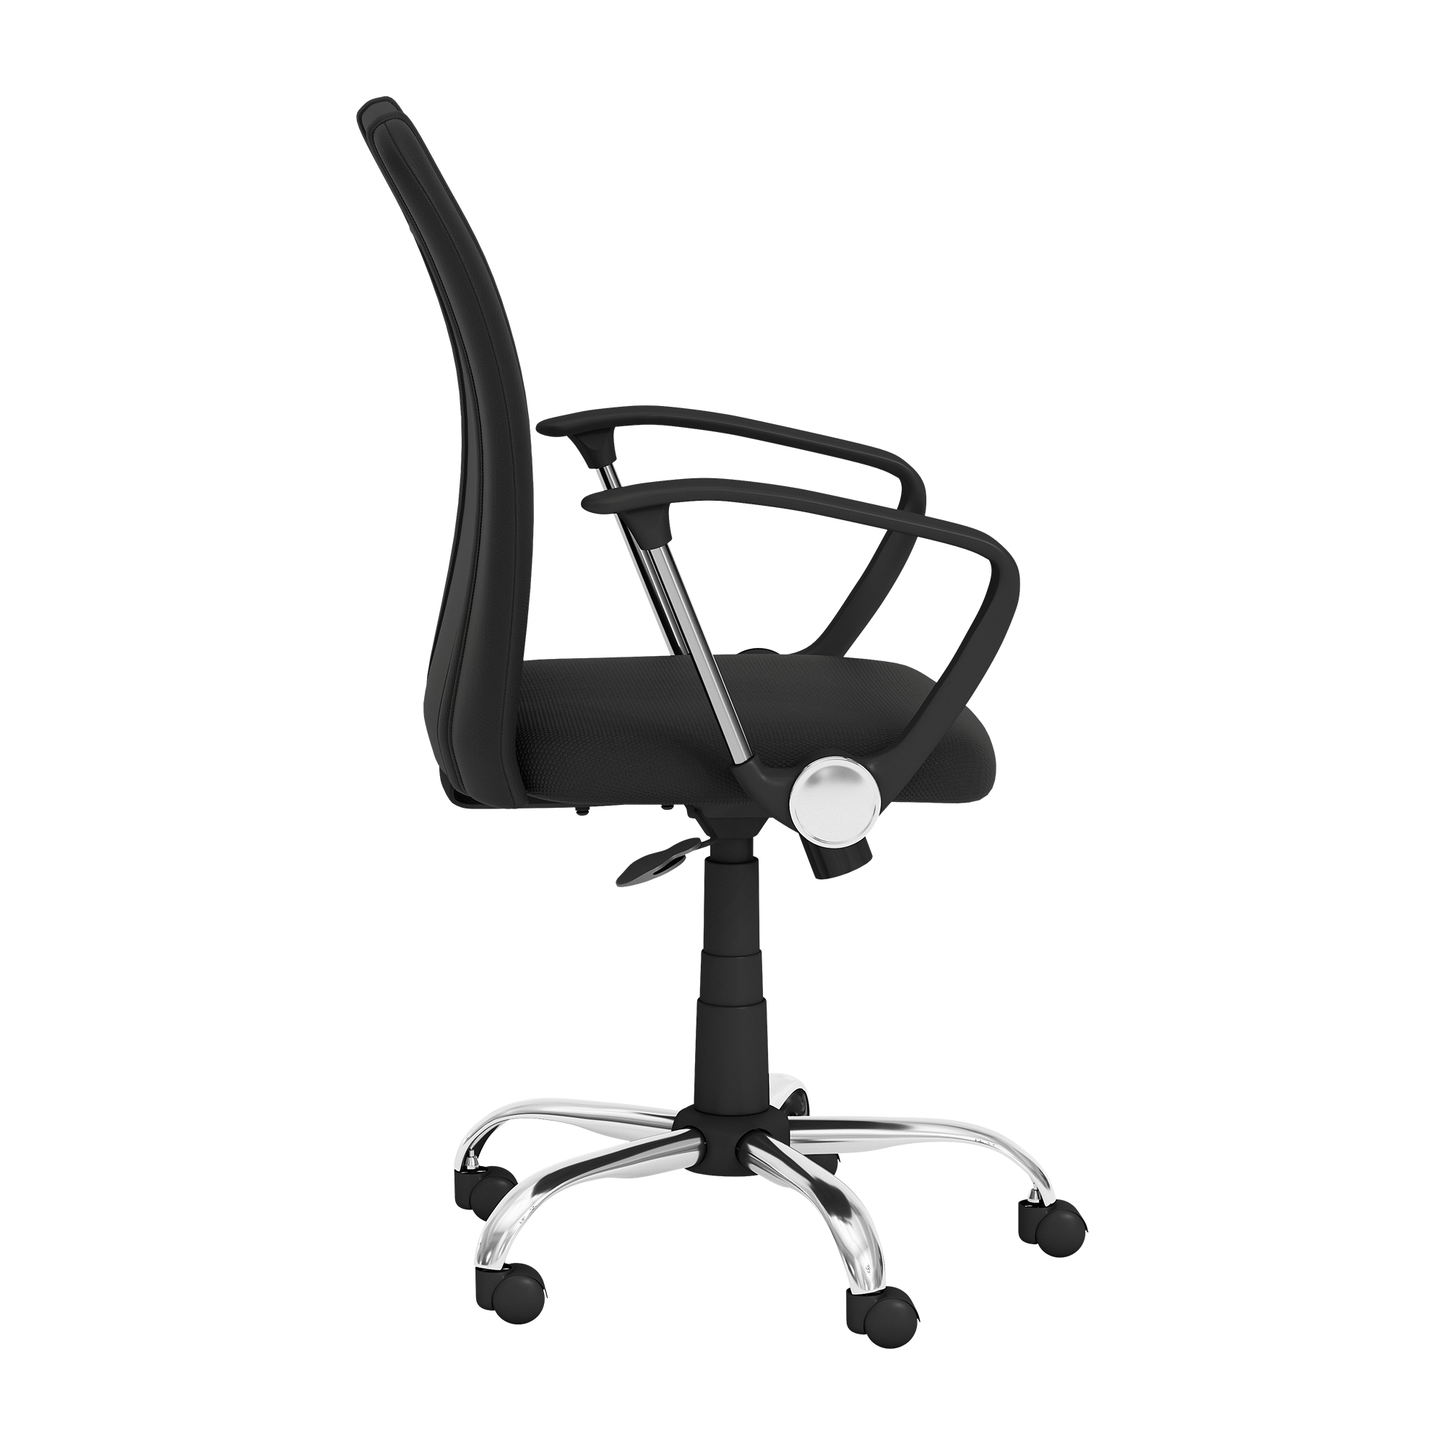 Curve Task Chair with Louisville Cardinals Logo